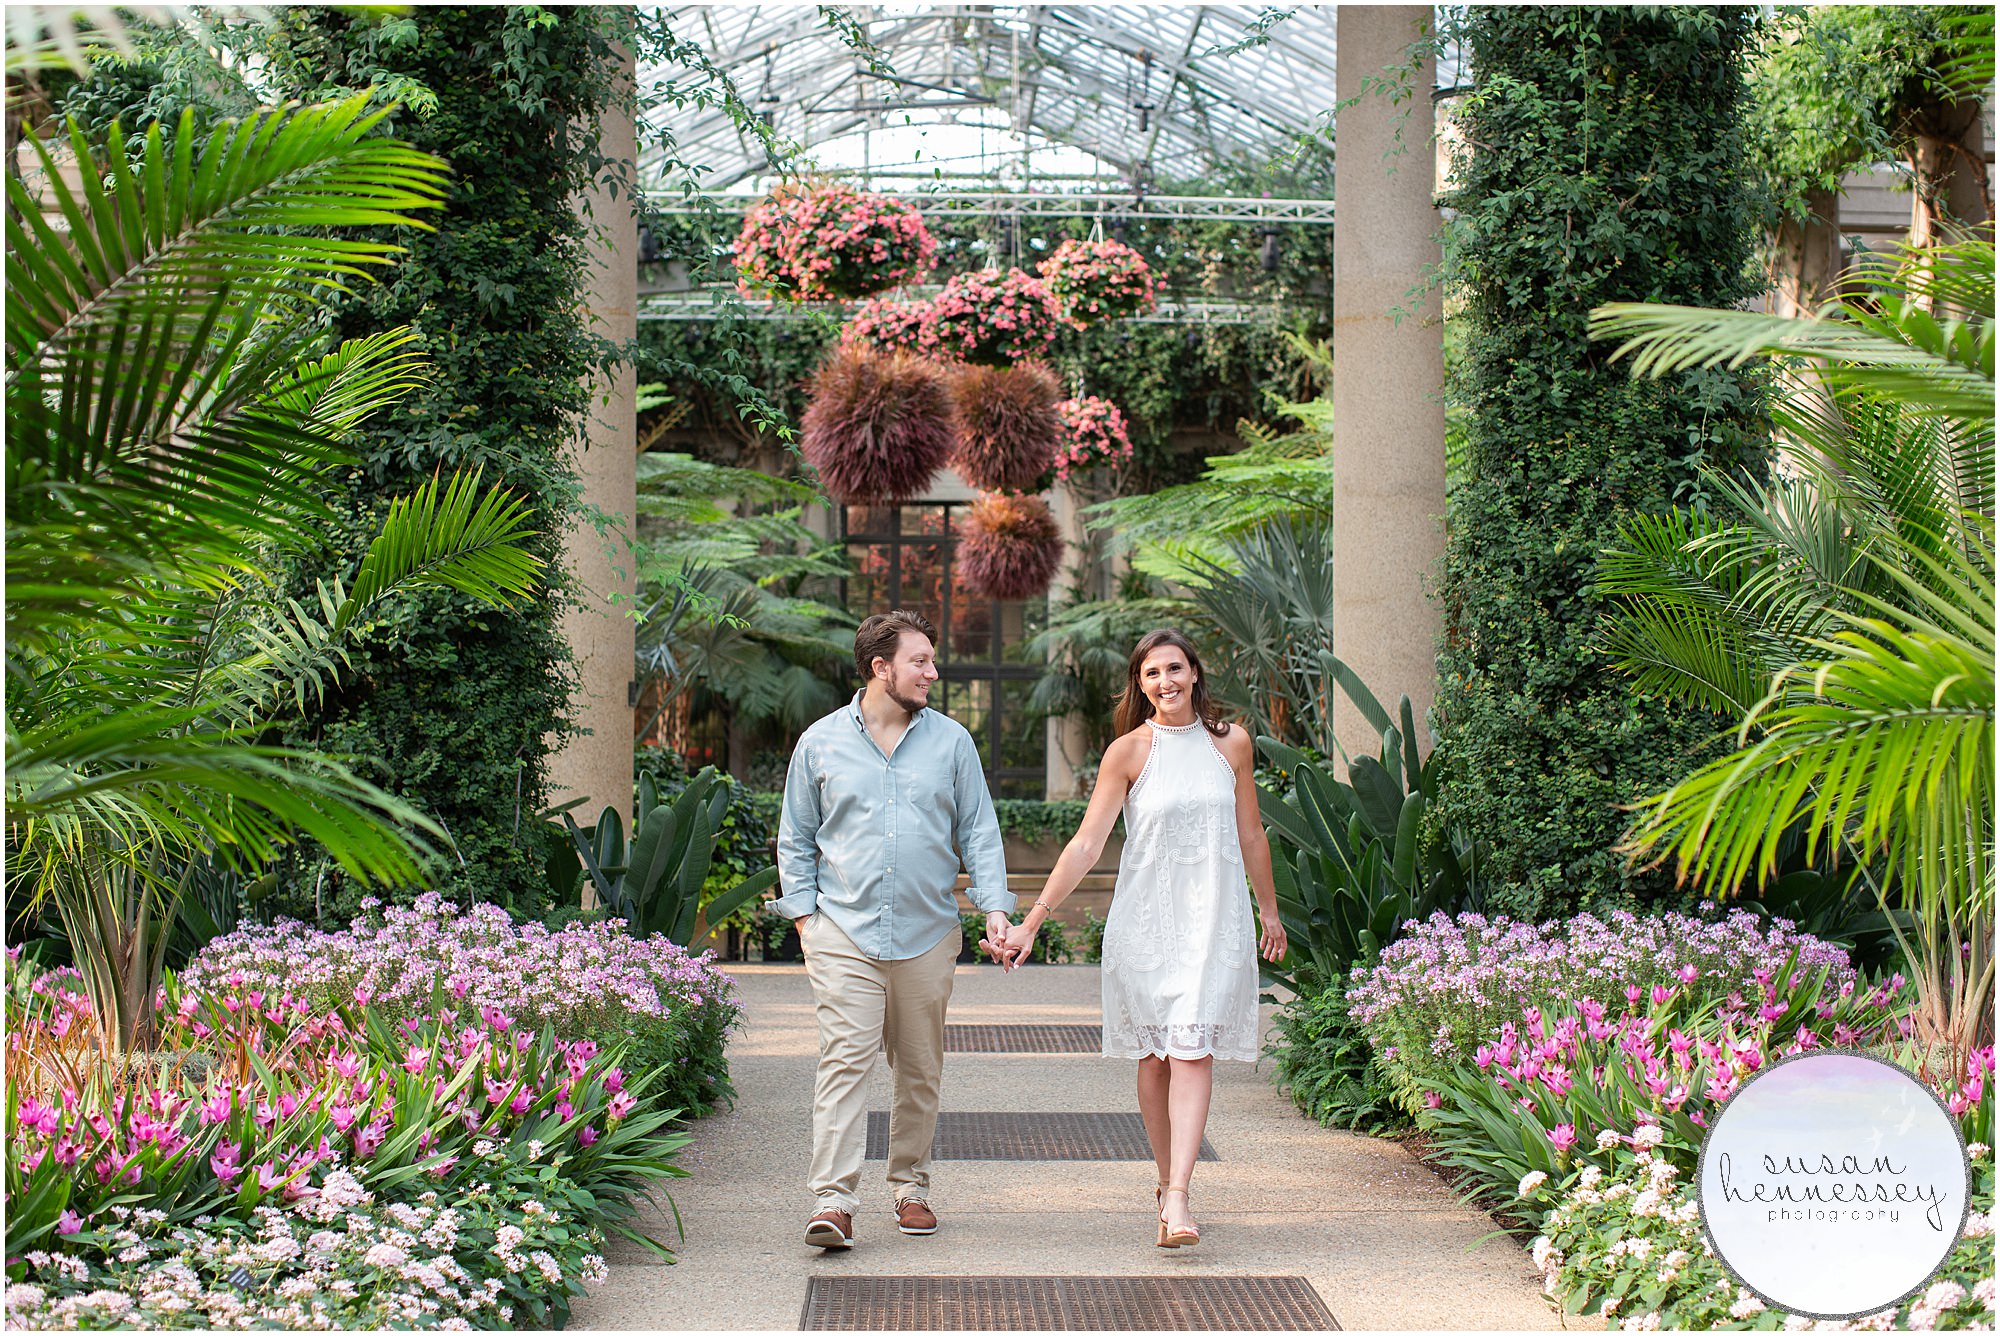 A happily engaged couple at their engagement session at longwood gardens